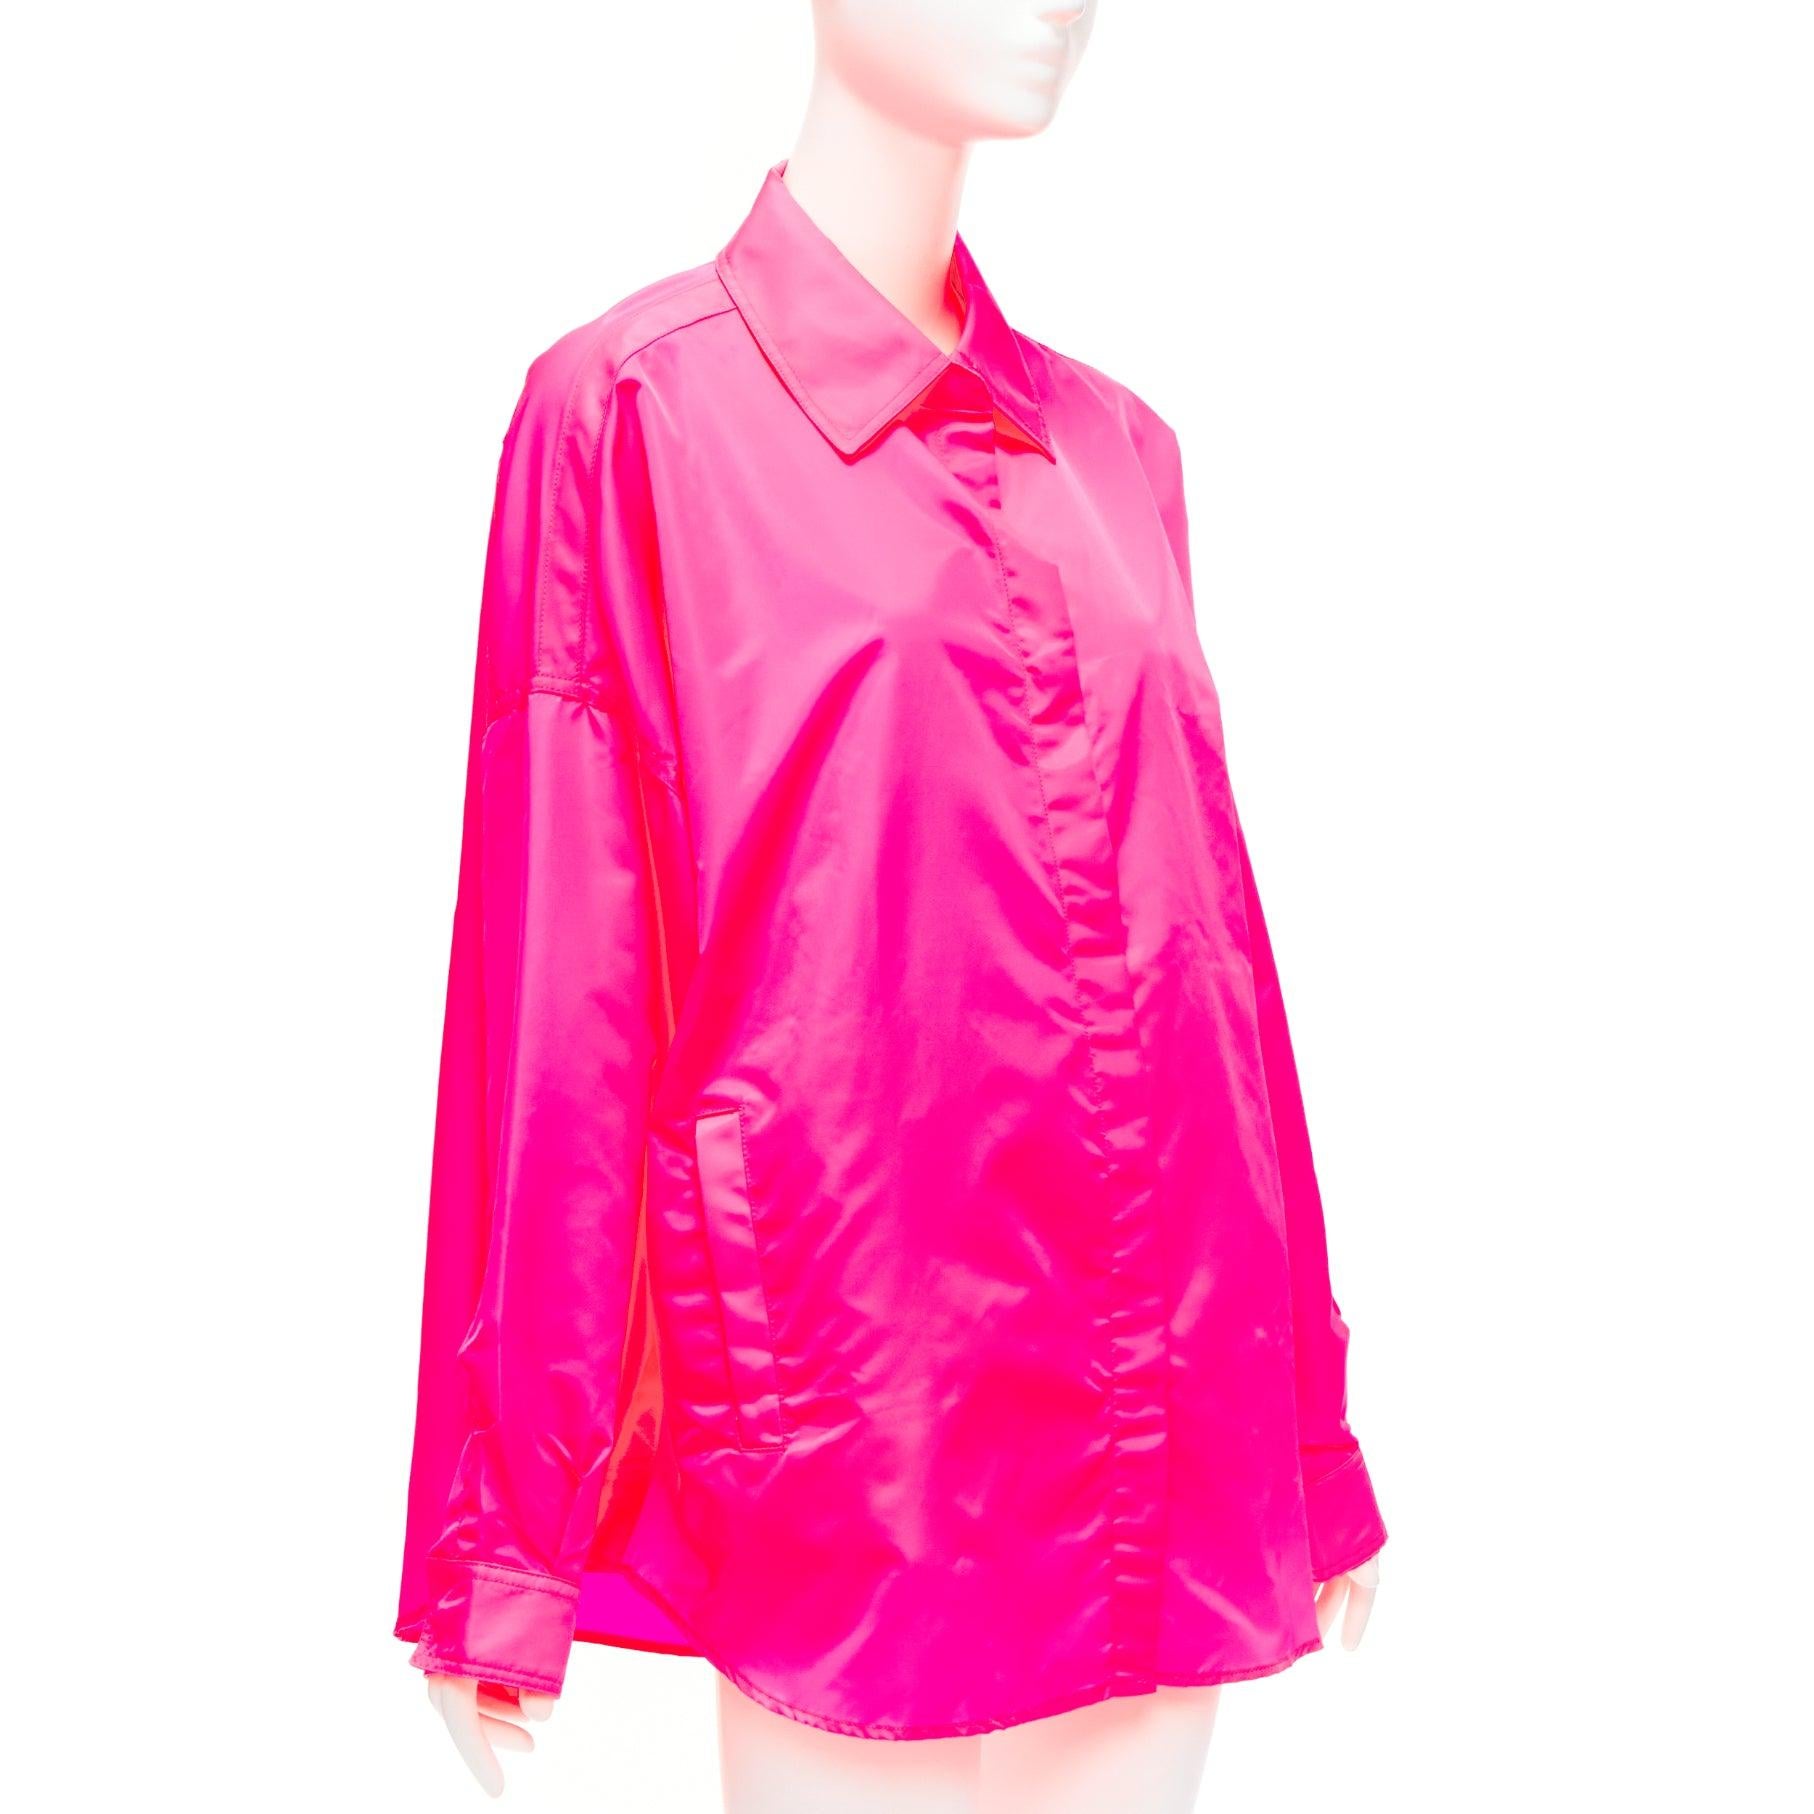 FRANKIE SHOP Perla hot pink nylon oversized shell shirt jacket XS
Reference: AAWC/A00677
Brand: Frankie Shop
Model: Perla
Material: Polyester
Color: Pink
Pattern: Solid
Closure: Snap Buttons
Extra Details: Dual front slit pockets. Oversized